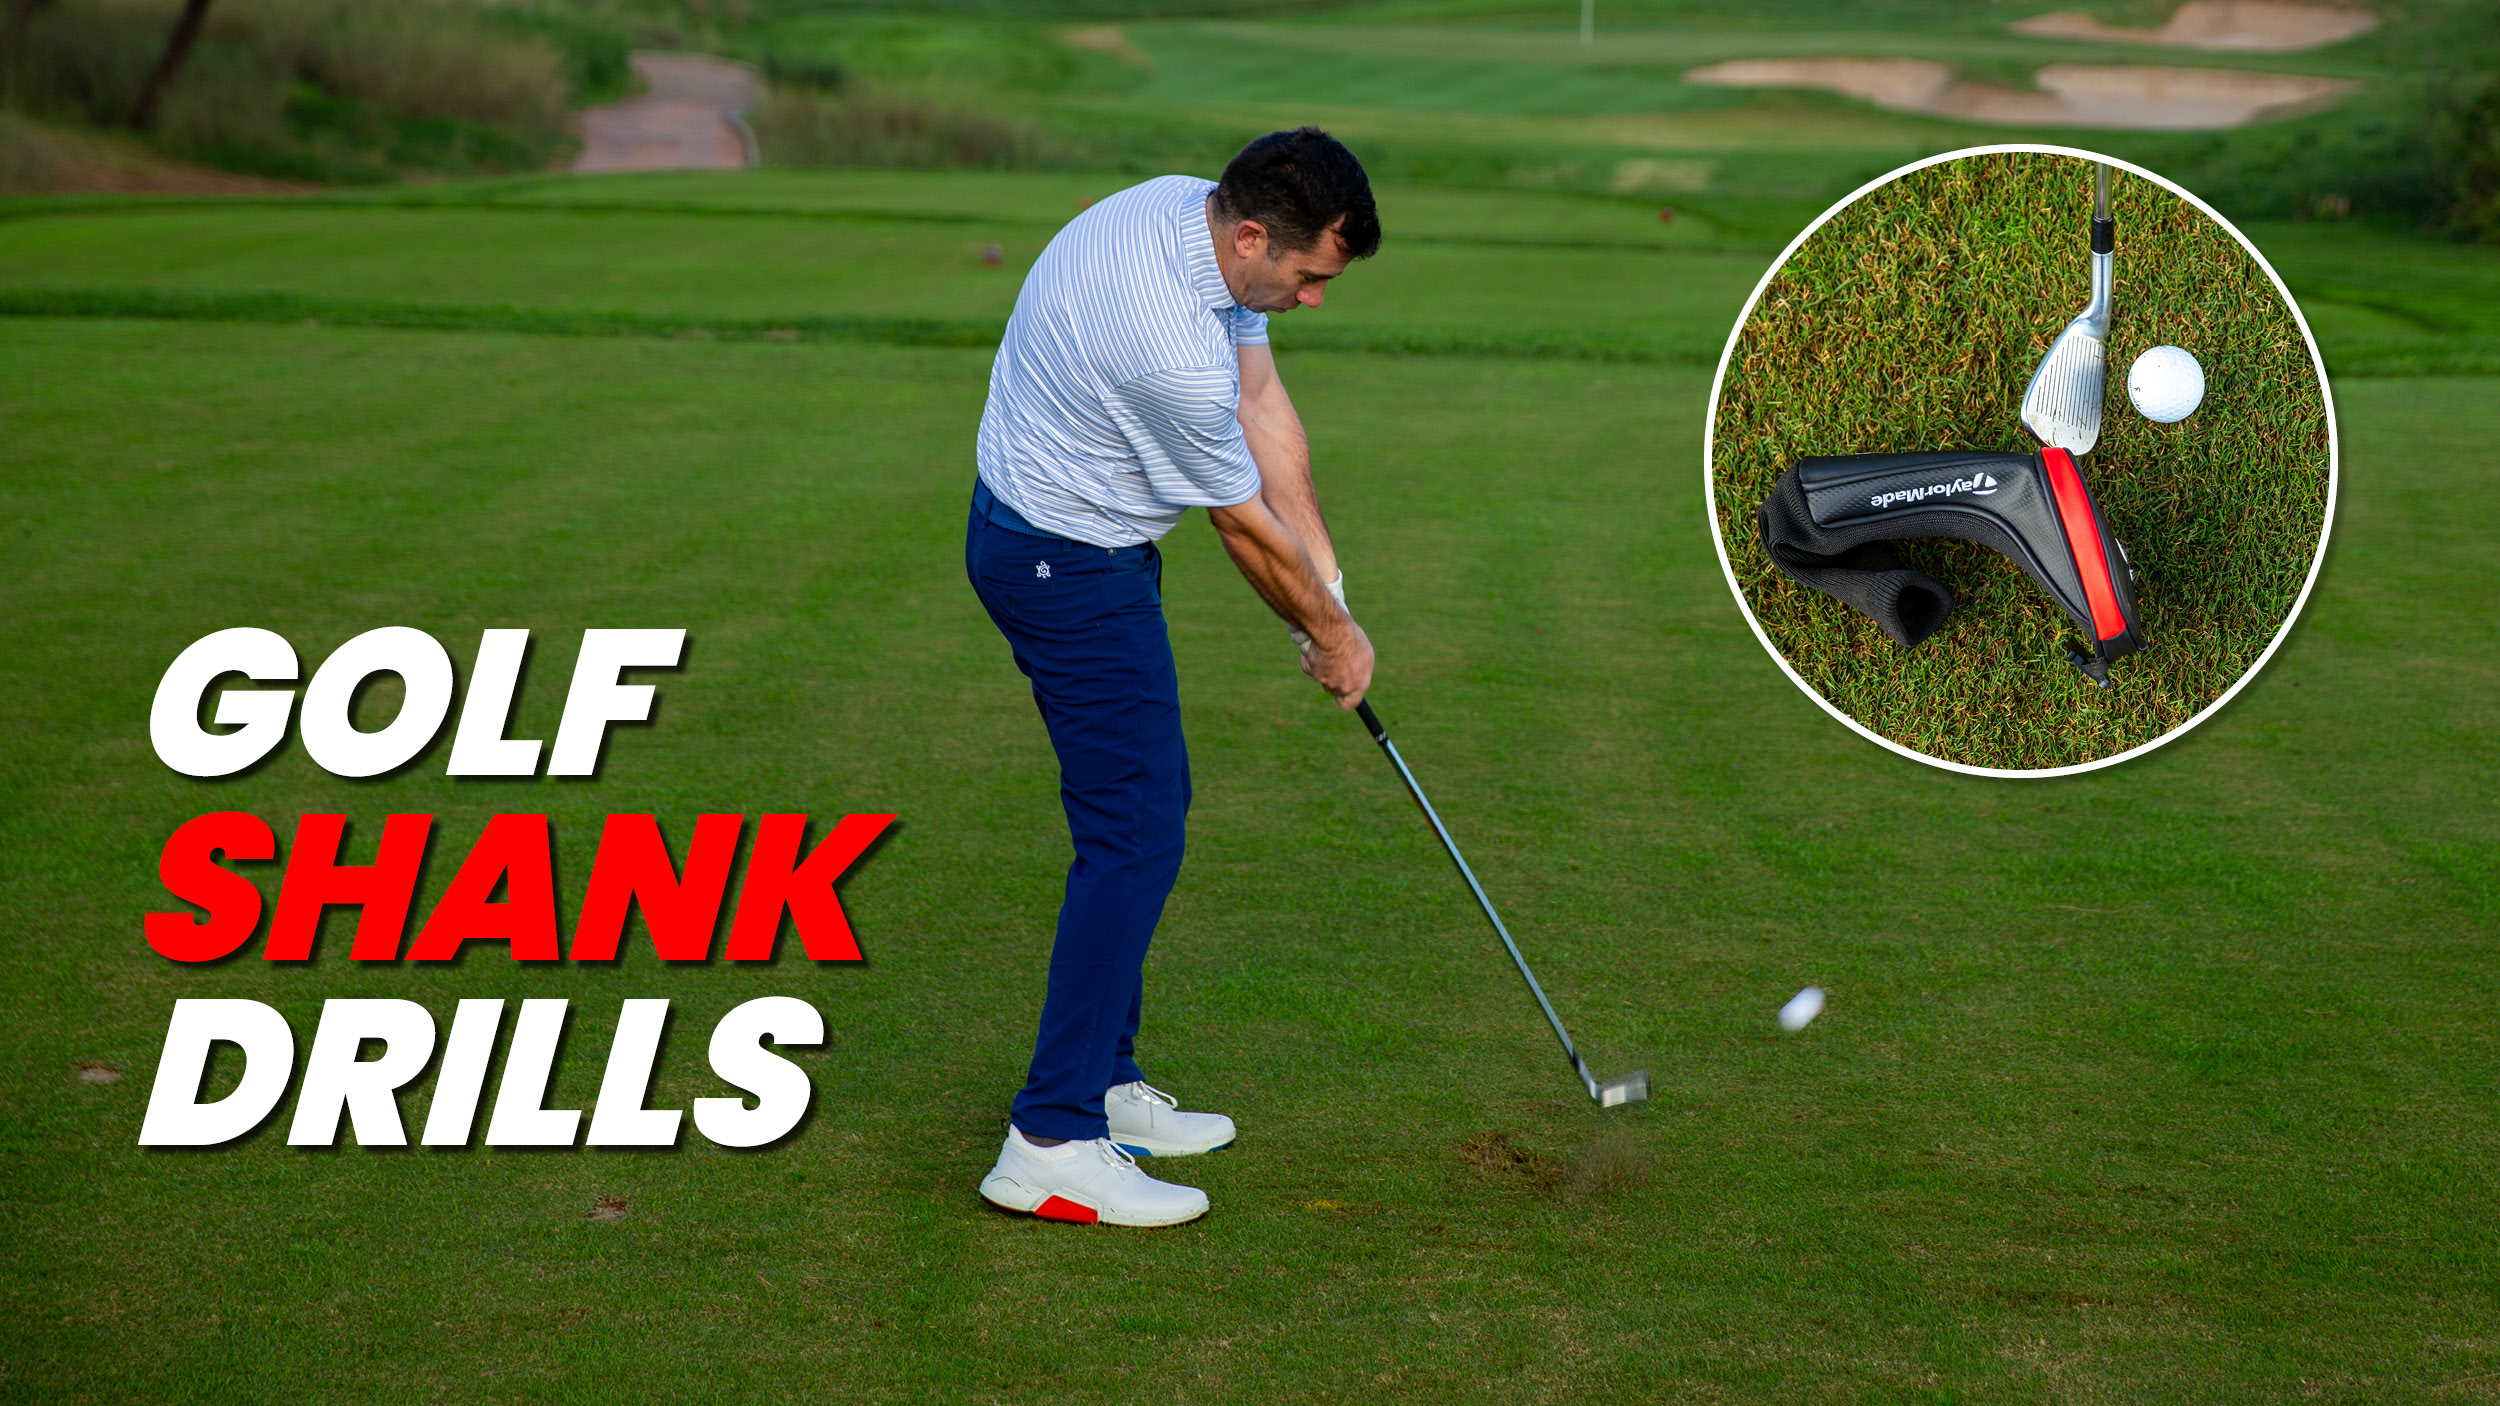 Golf Shank Drills - Tips To Improve Your Ball Striking | Golf Monthly